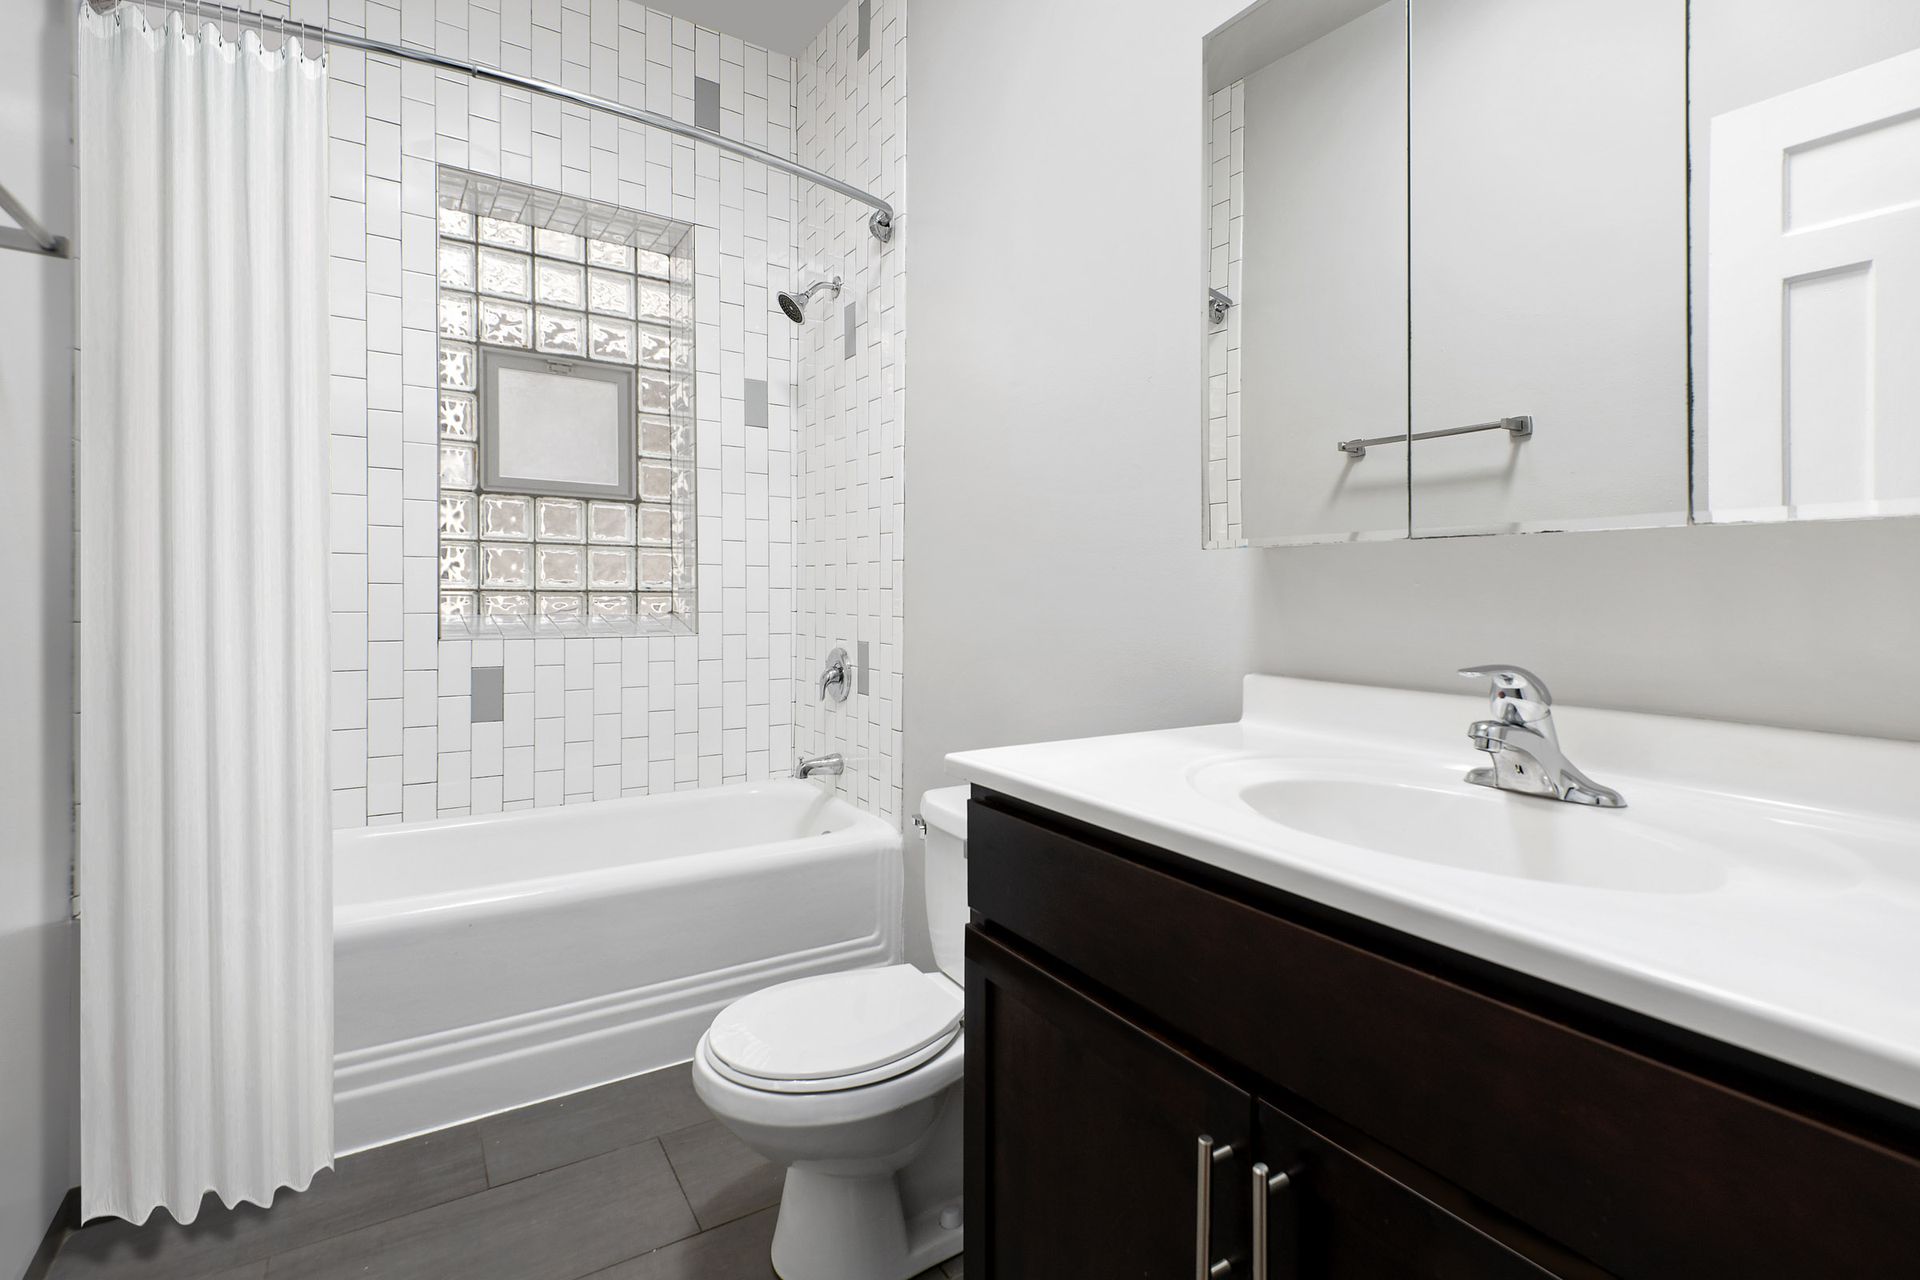 A bathroom with a toilet, sink, and bathtub at 429 W Melrose Street.